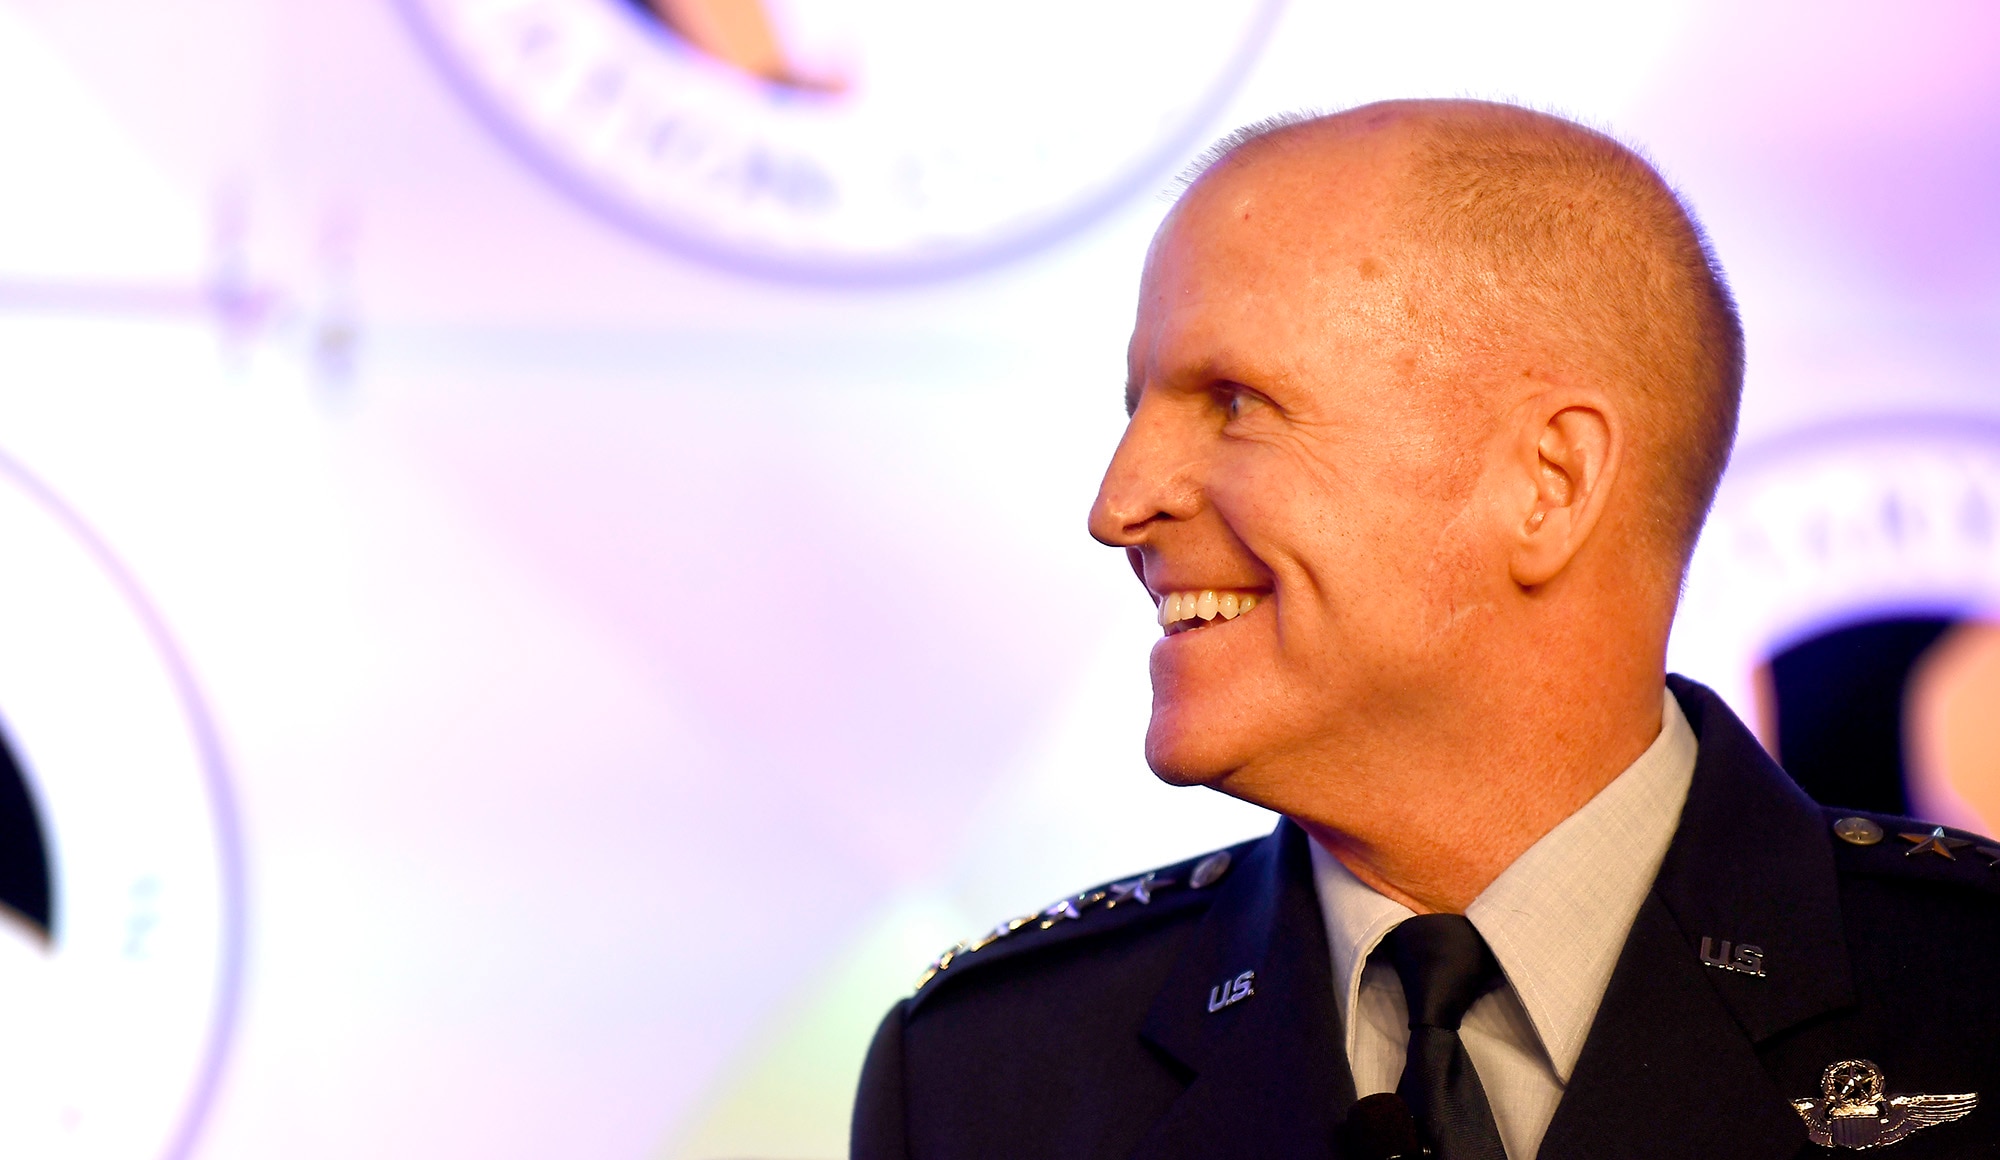 Air Force Vice Chief of Staff Gen. Stephen W. Wilson smiles during the Military Child Education Coalition National Training Seminar in Washington, D.C., July 24, 2018. The Air Force has continuously placed an emphasis on school age dependent education because of a direct correlation with family resilience to maintain a willingness of families to continue to support their Airman sponsors wherever they are asked to serve. (U.S. Air Force photo by Staff Sgt. Rusty Frank)